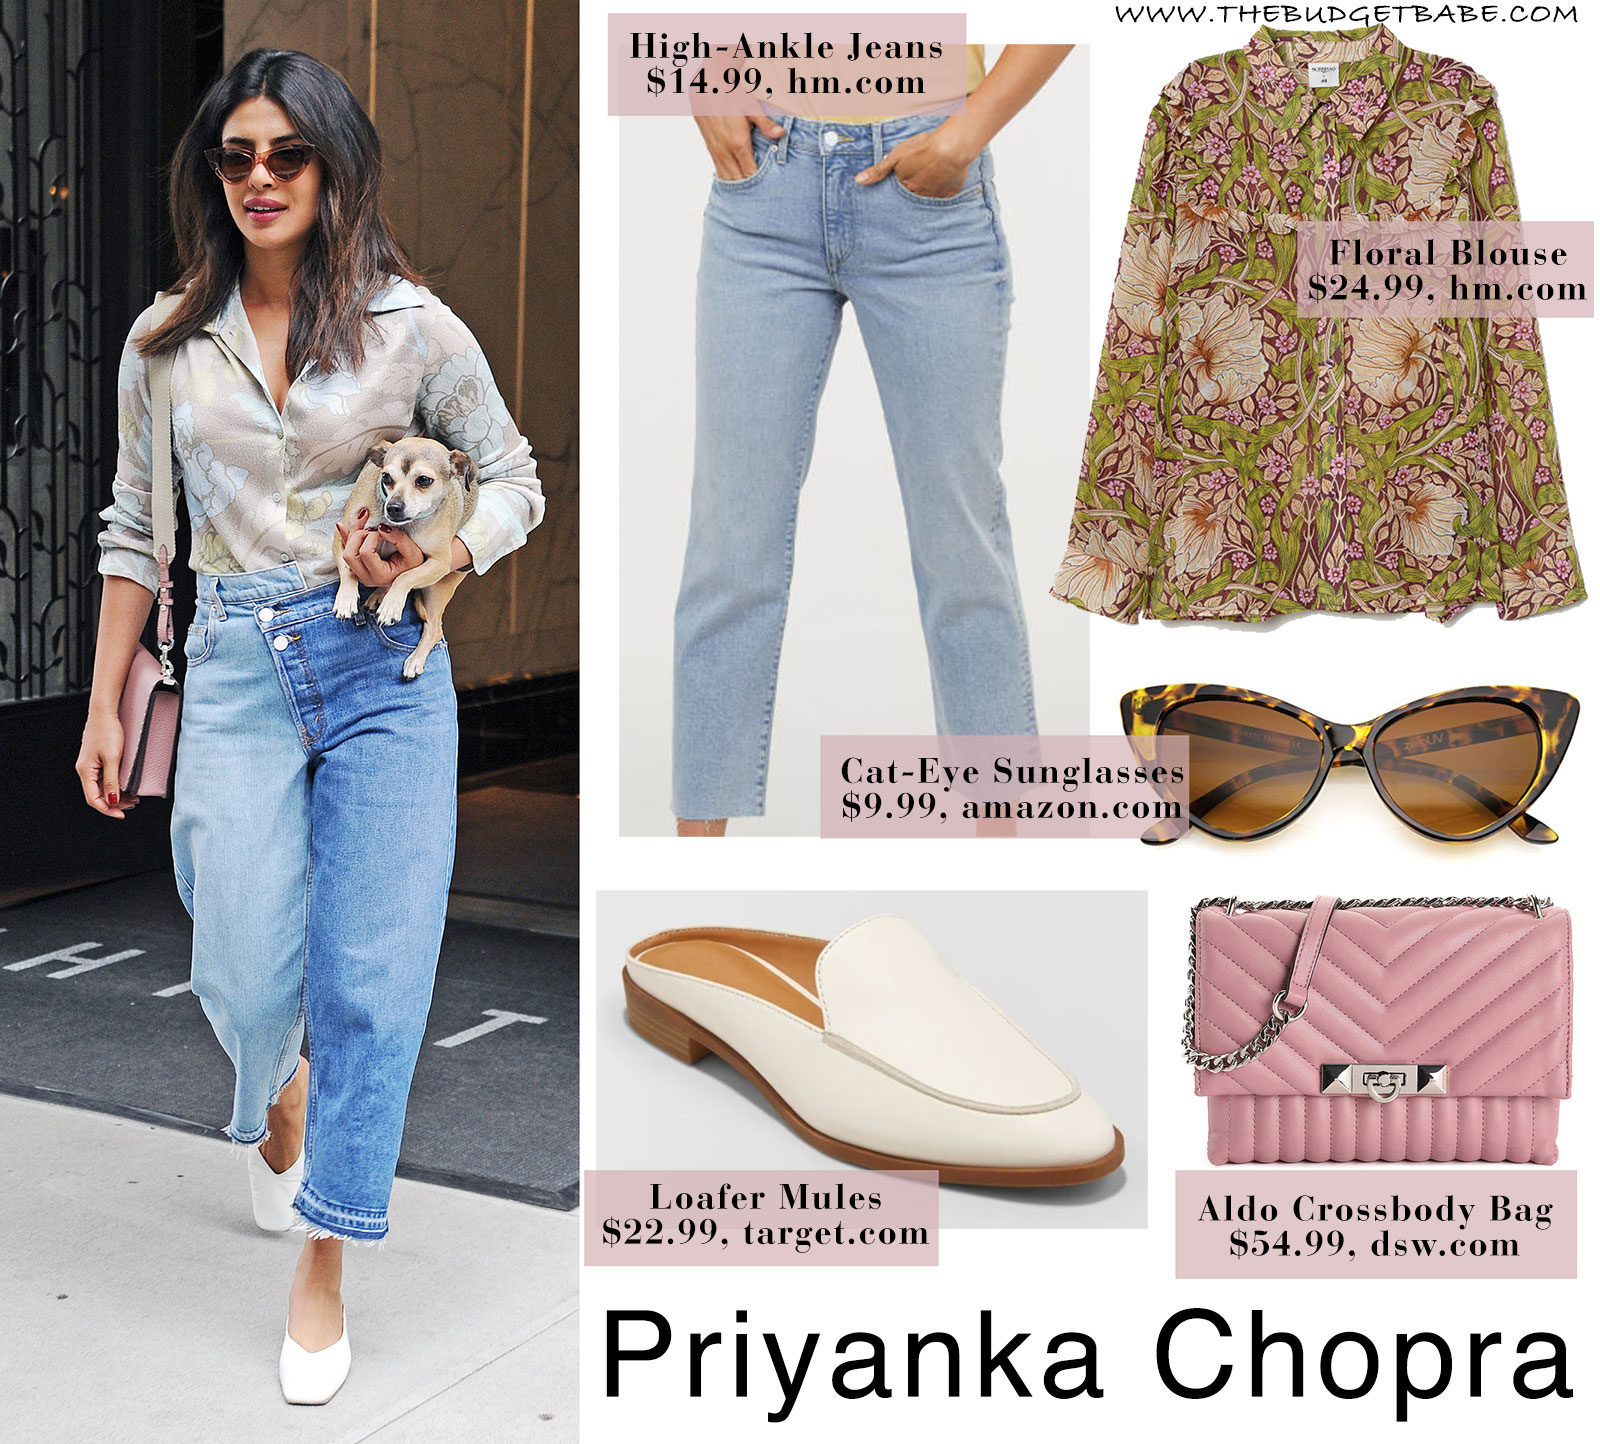 Priyanka Chopra's floral blouse and Monse split wash jeans look for less